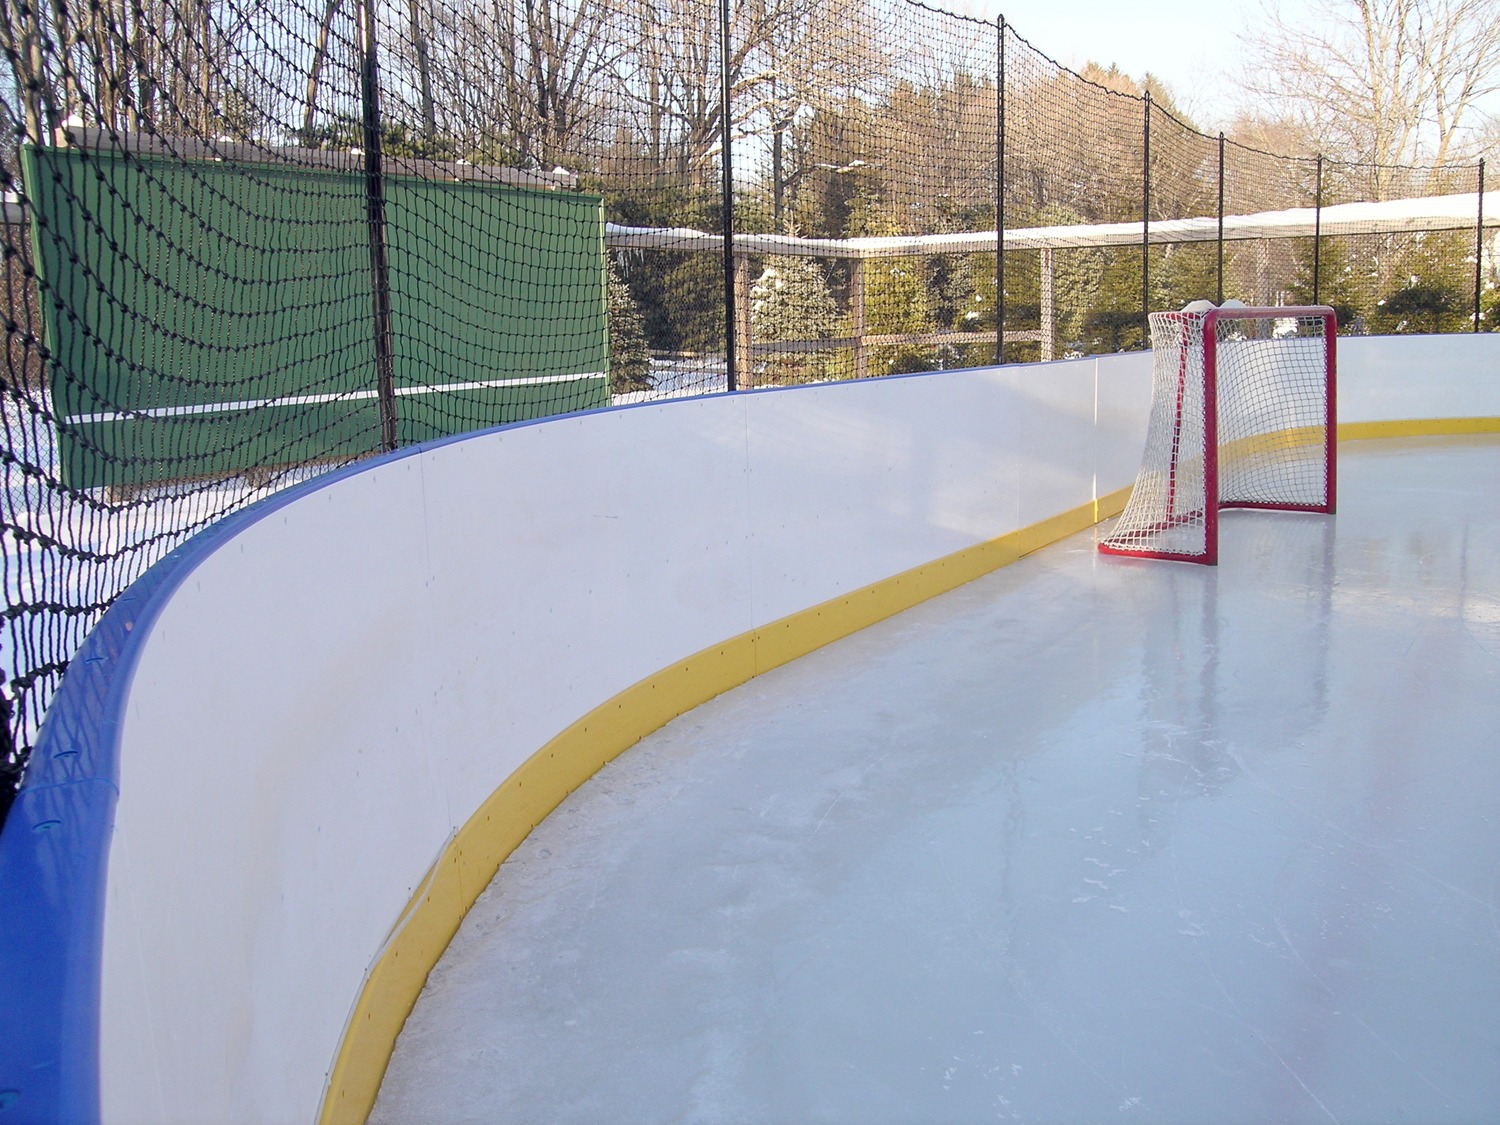 Empty outdoor hockey rink with a red goalpost, white ice surface, yellow kick plate, and netting against a backdrop of trees under a clear sky.